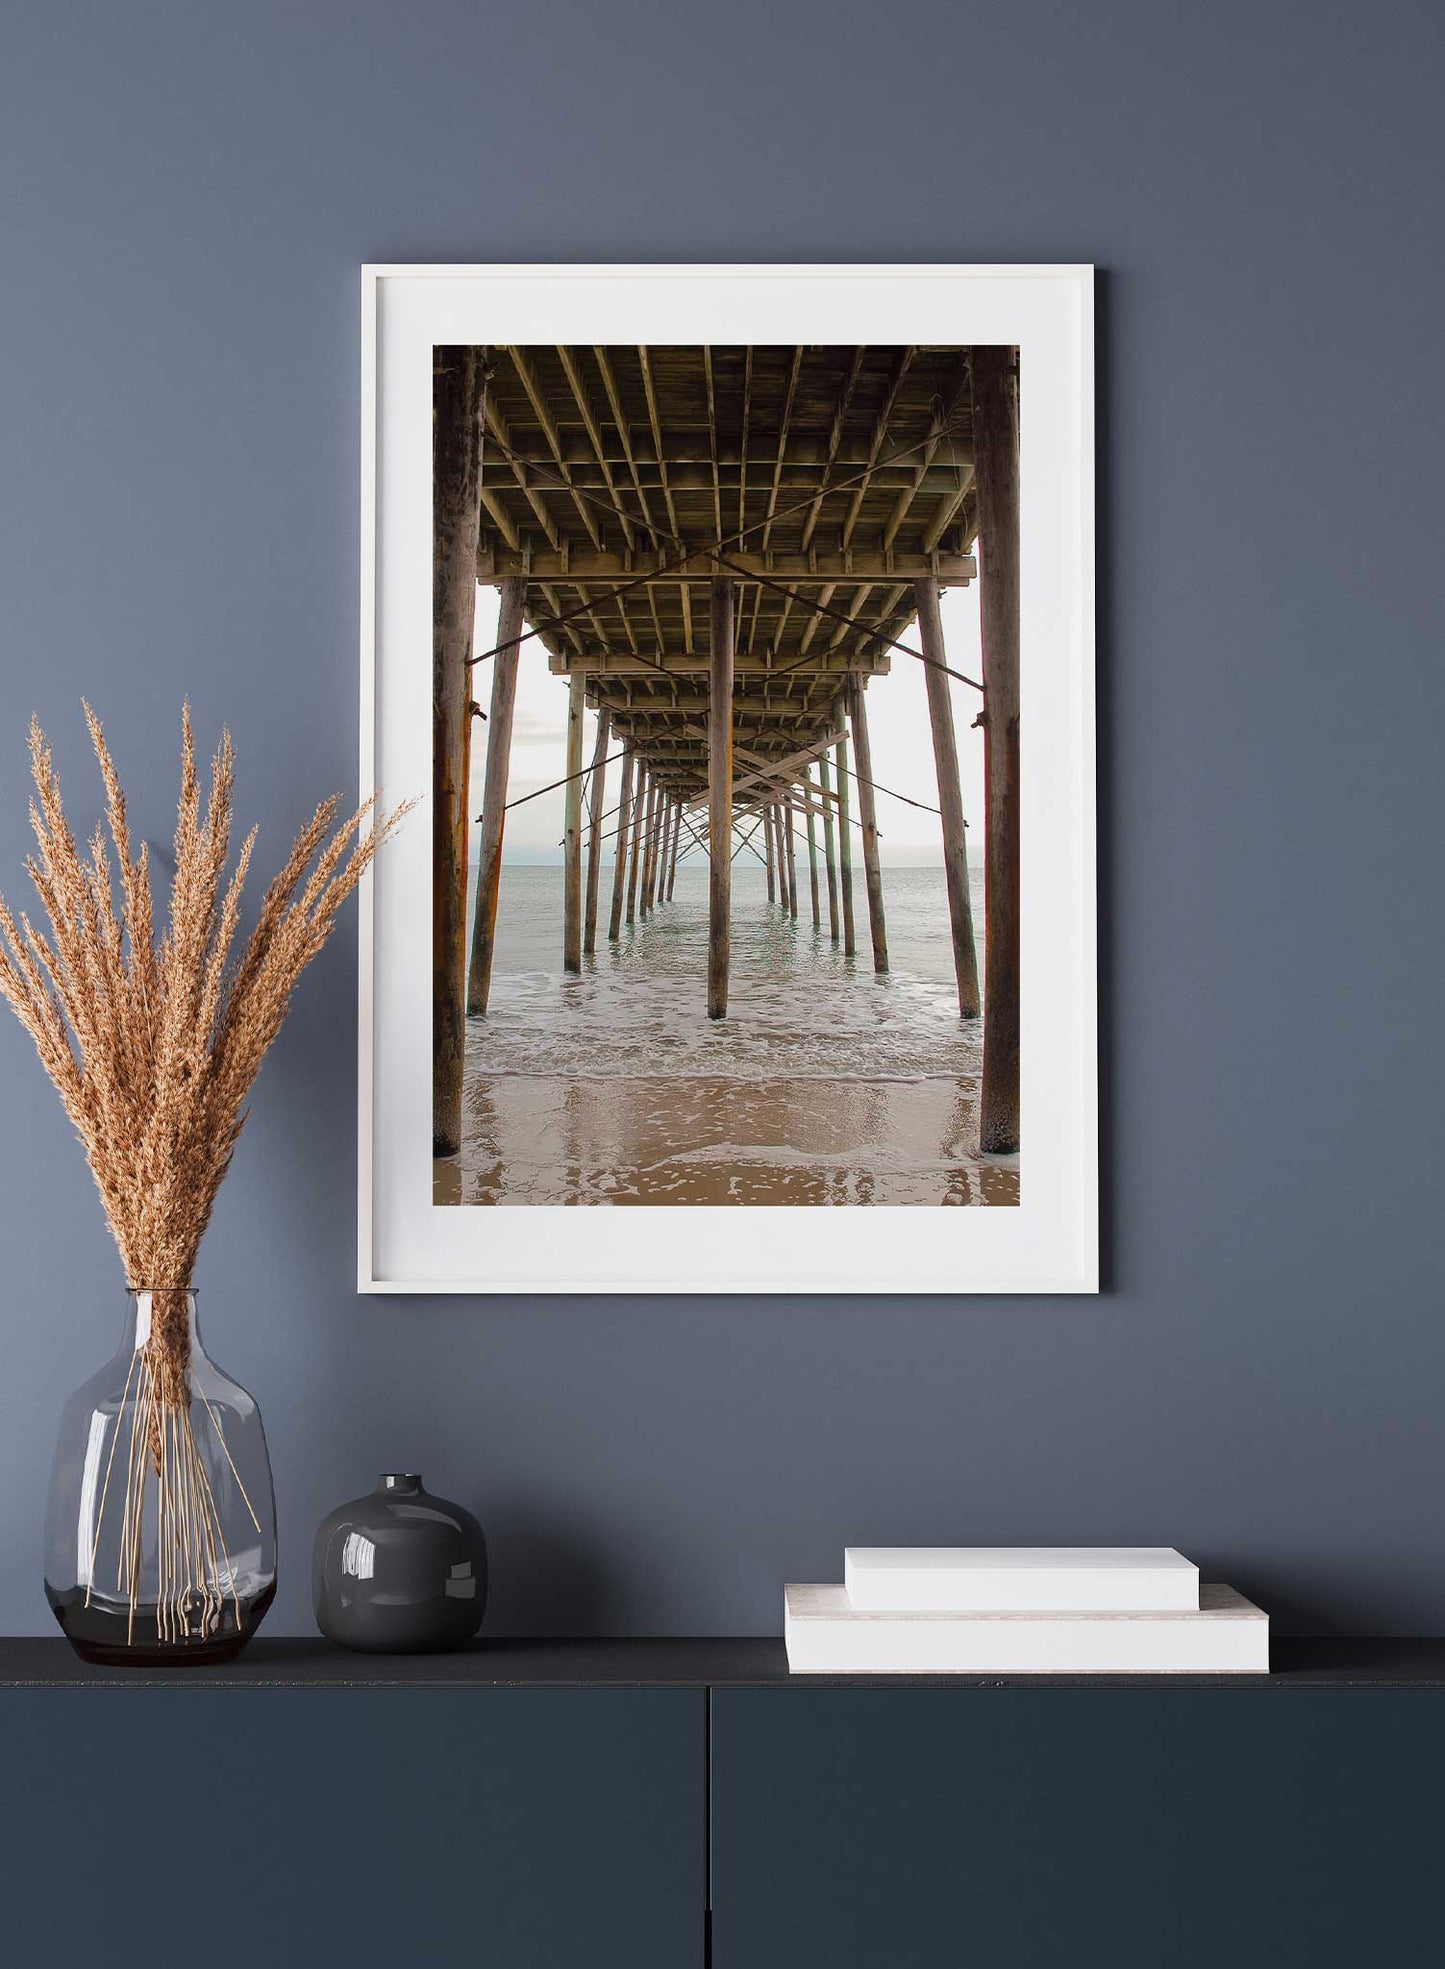 Beach House is a minimalist photography of an underview of a beach dock where waves are calmly flowing under by Opposite Wall.